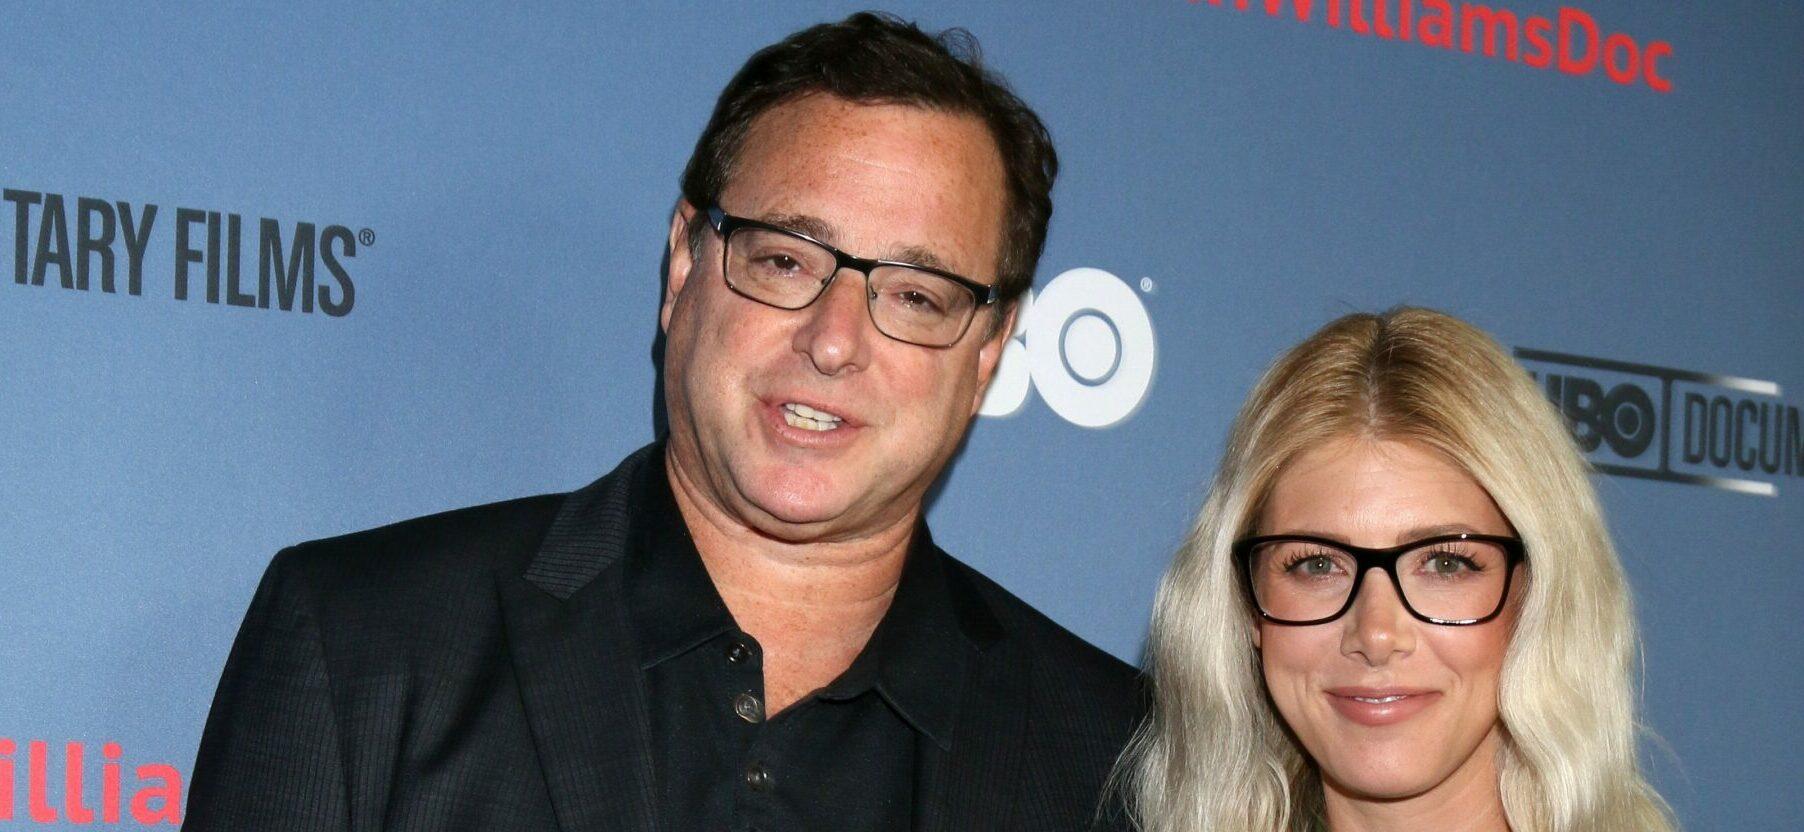 Bob Saget’s Widow Wants To Turn Her Grief Into ‘Positive Experience’